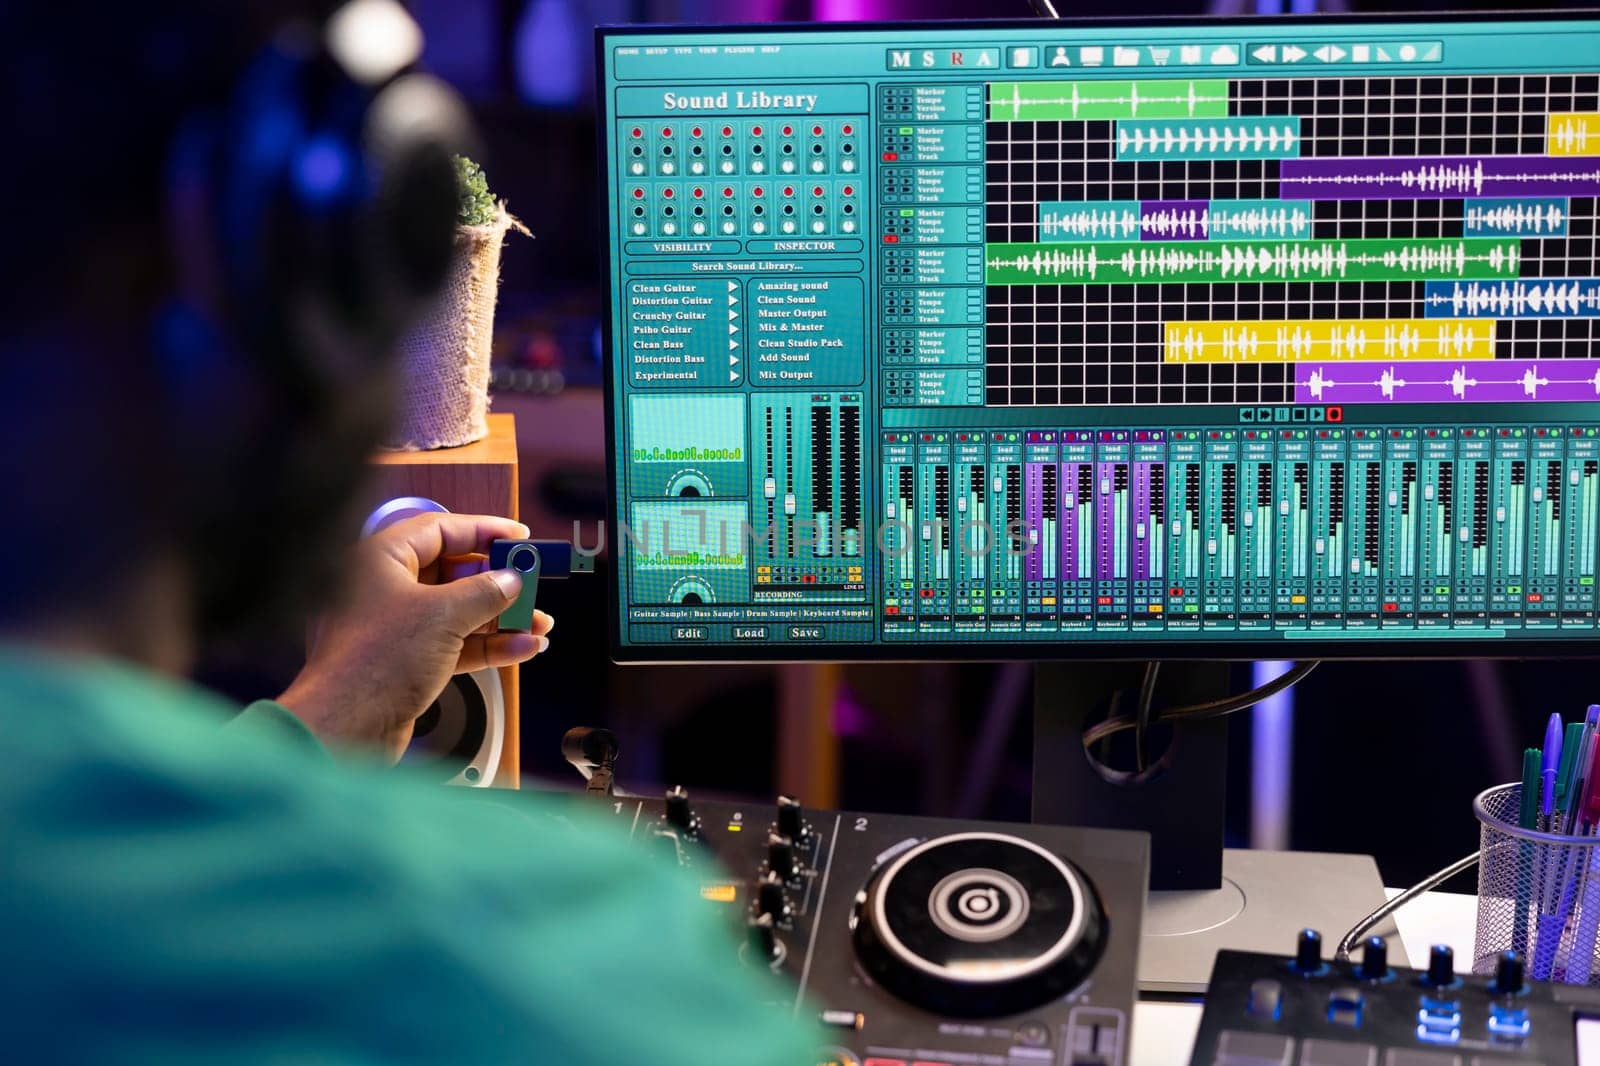 Artist composing new music with an usb stick in his home studio, editing songs from old audio recordings. Skilled songwriter producer mixing and mastering soundtracks, production software.